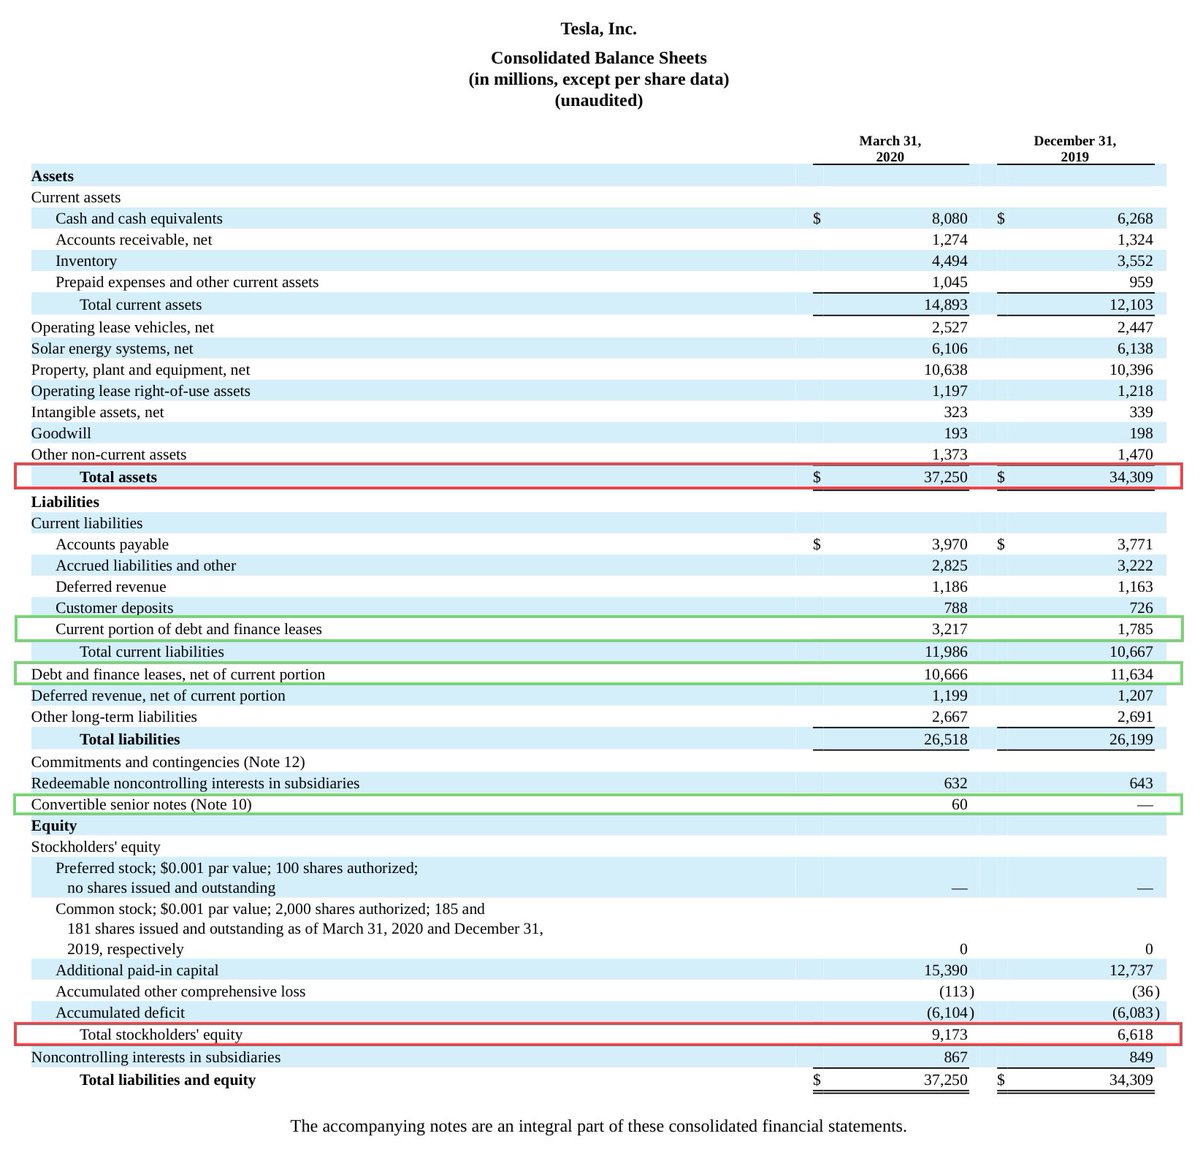 7. At the same time, $13.94 billion of that $18.45 billion of Cash raised from Financing is clearly recorded as repayable capital in the form of Debt8. And another $9.17 billion is sitting in the Shareholders Equity account9. That gives a total of $23.11 billion of Financing